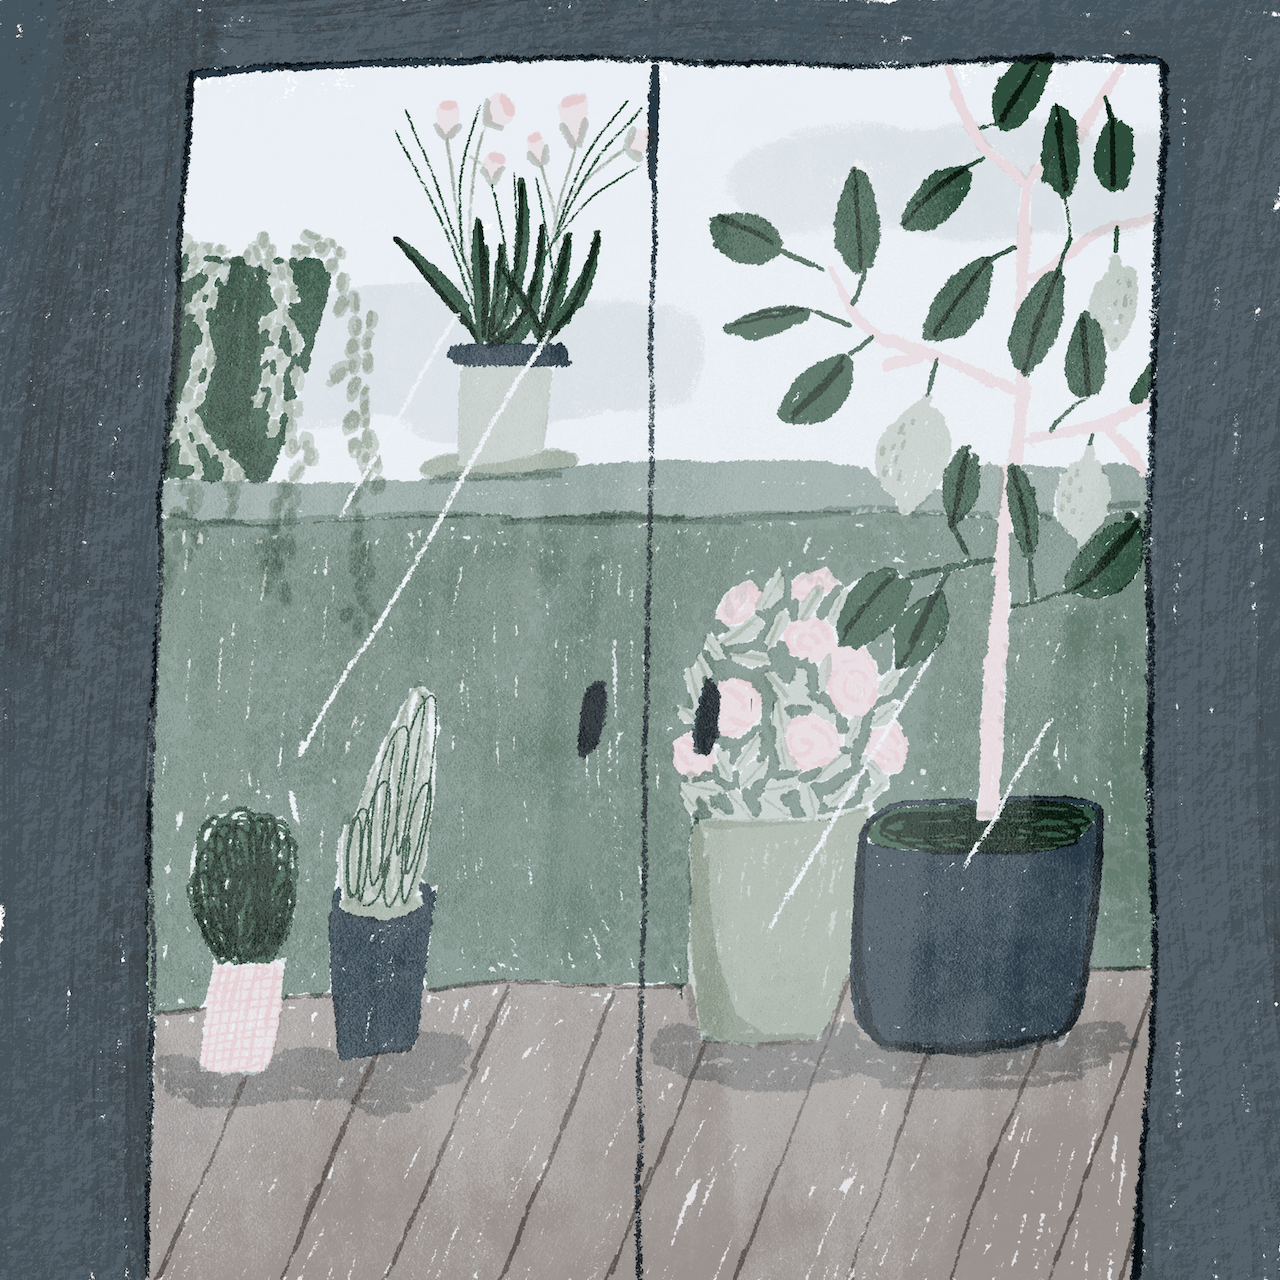 illustration of looking at flower pots through a glass